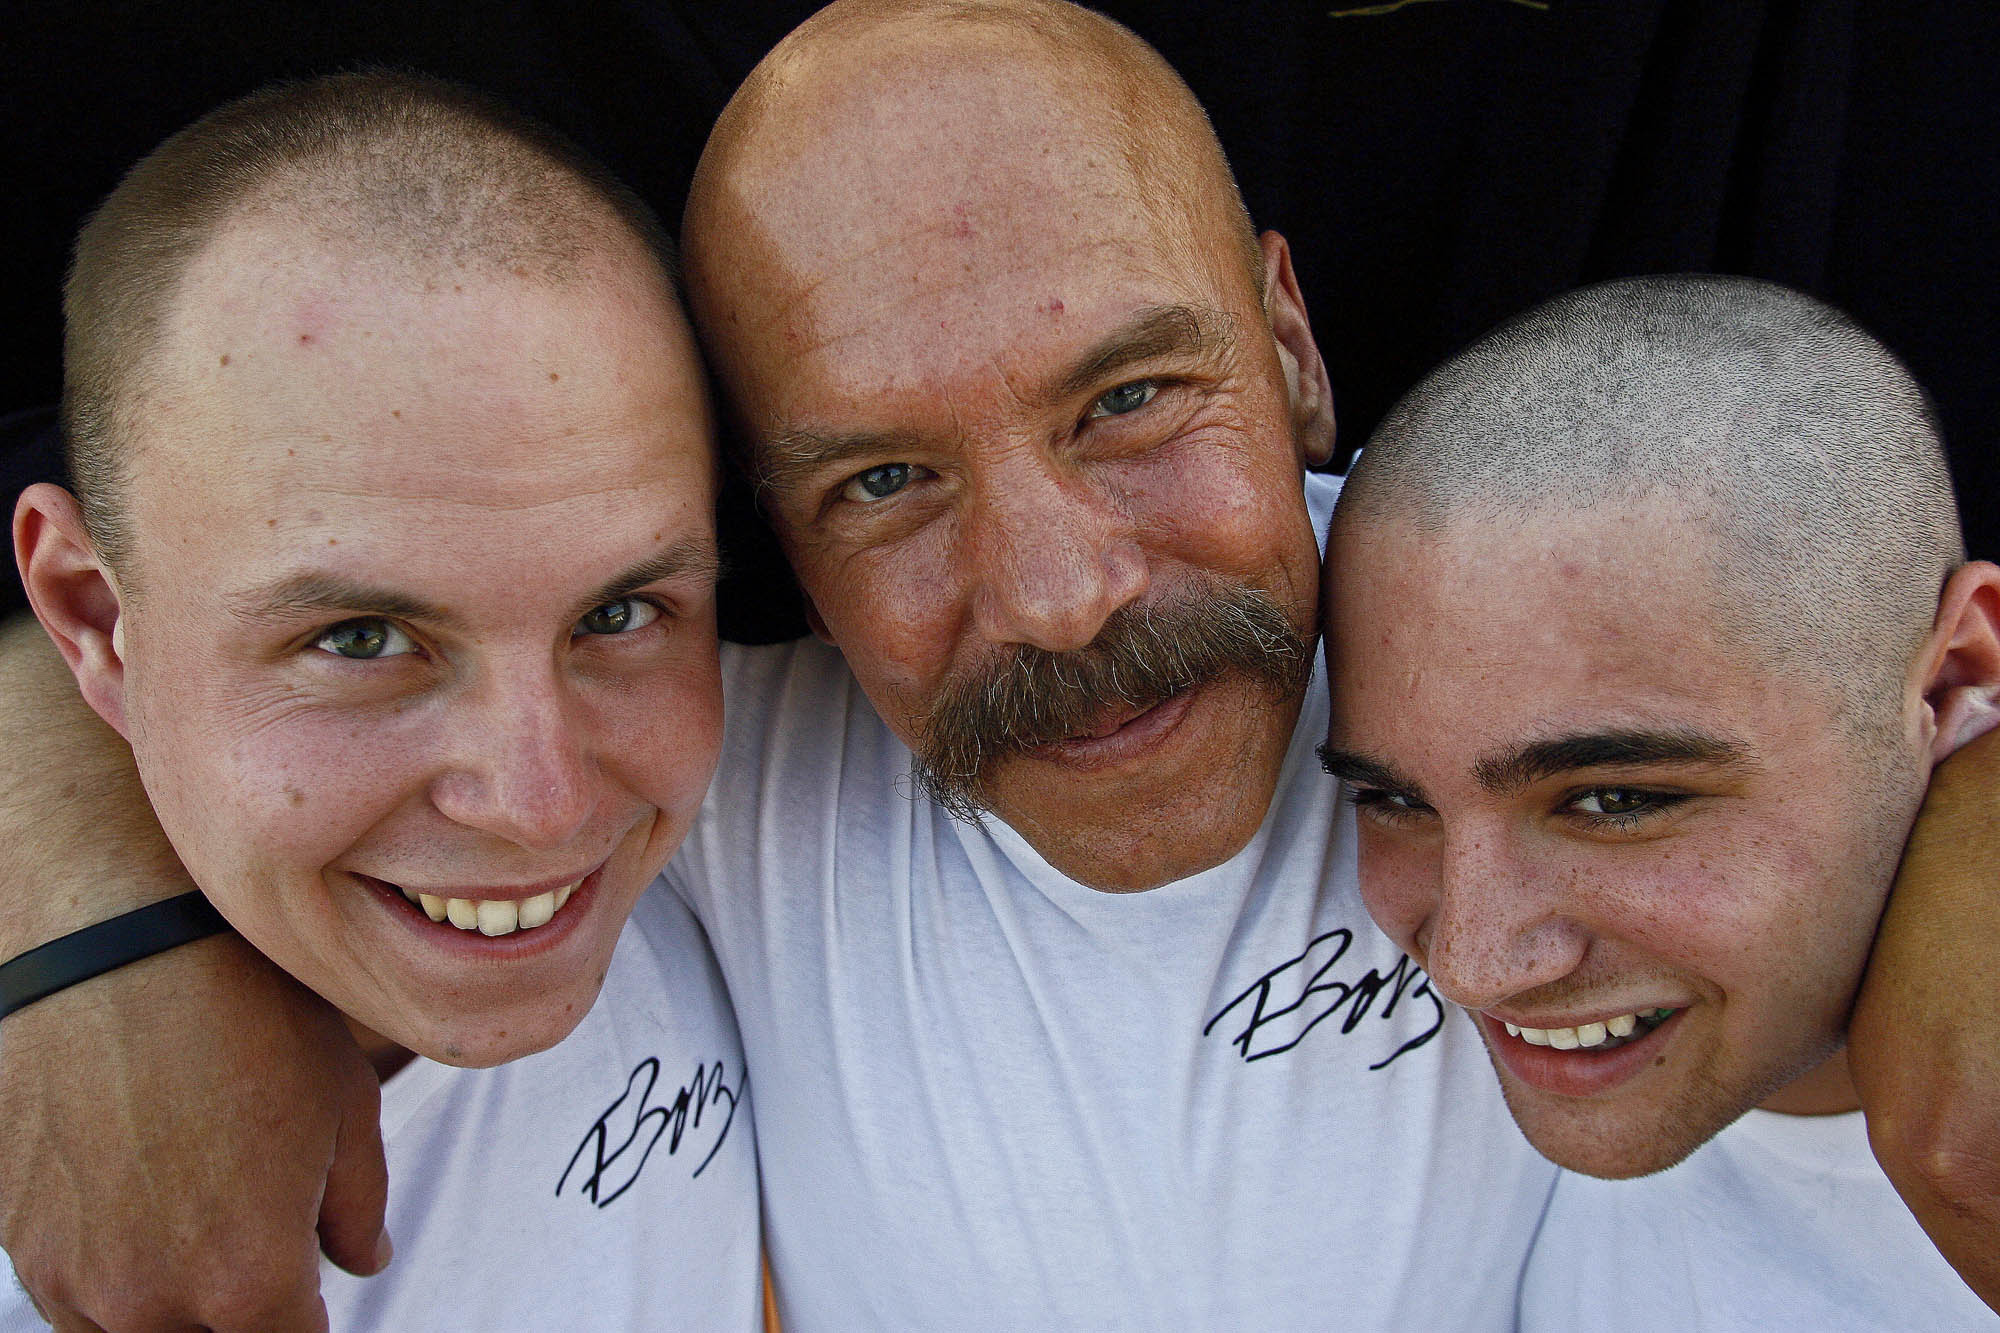 Bonded by baldness